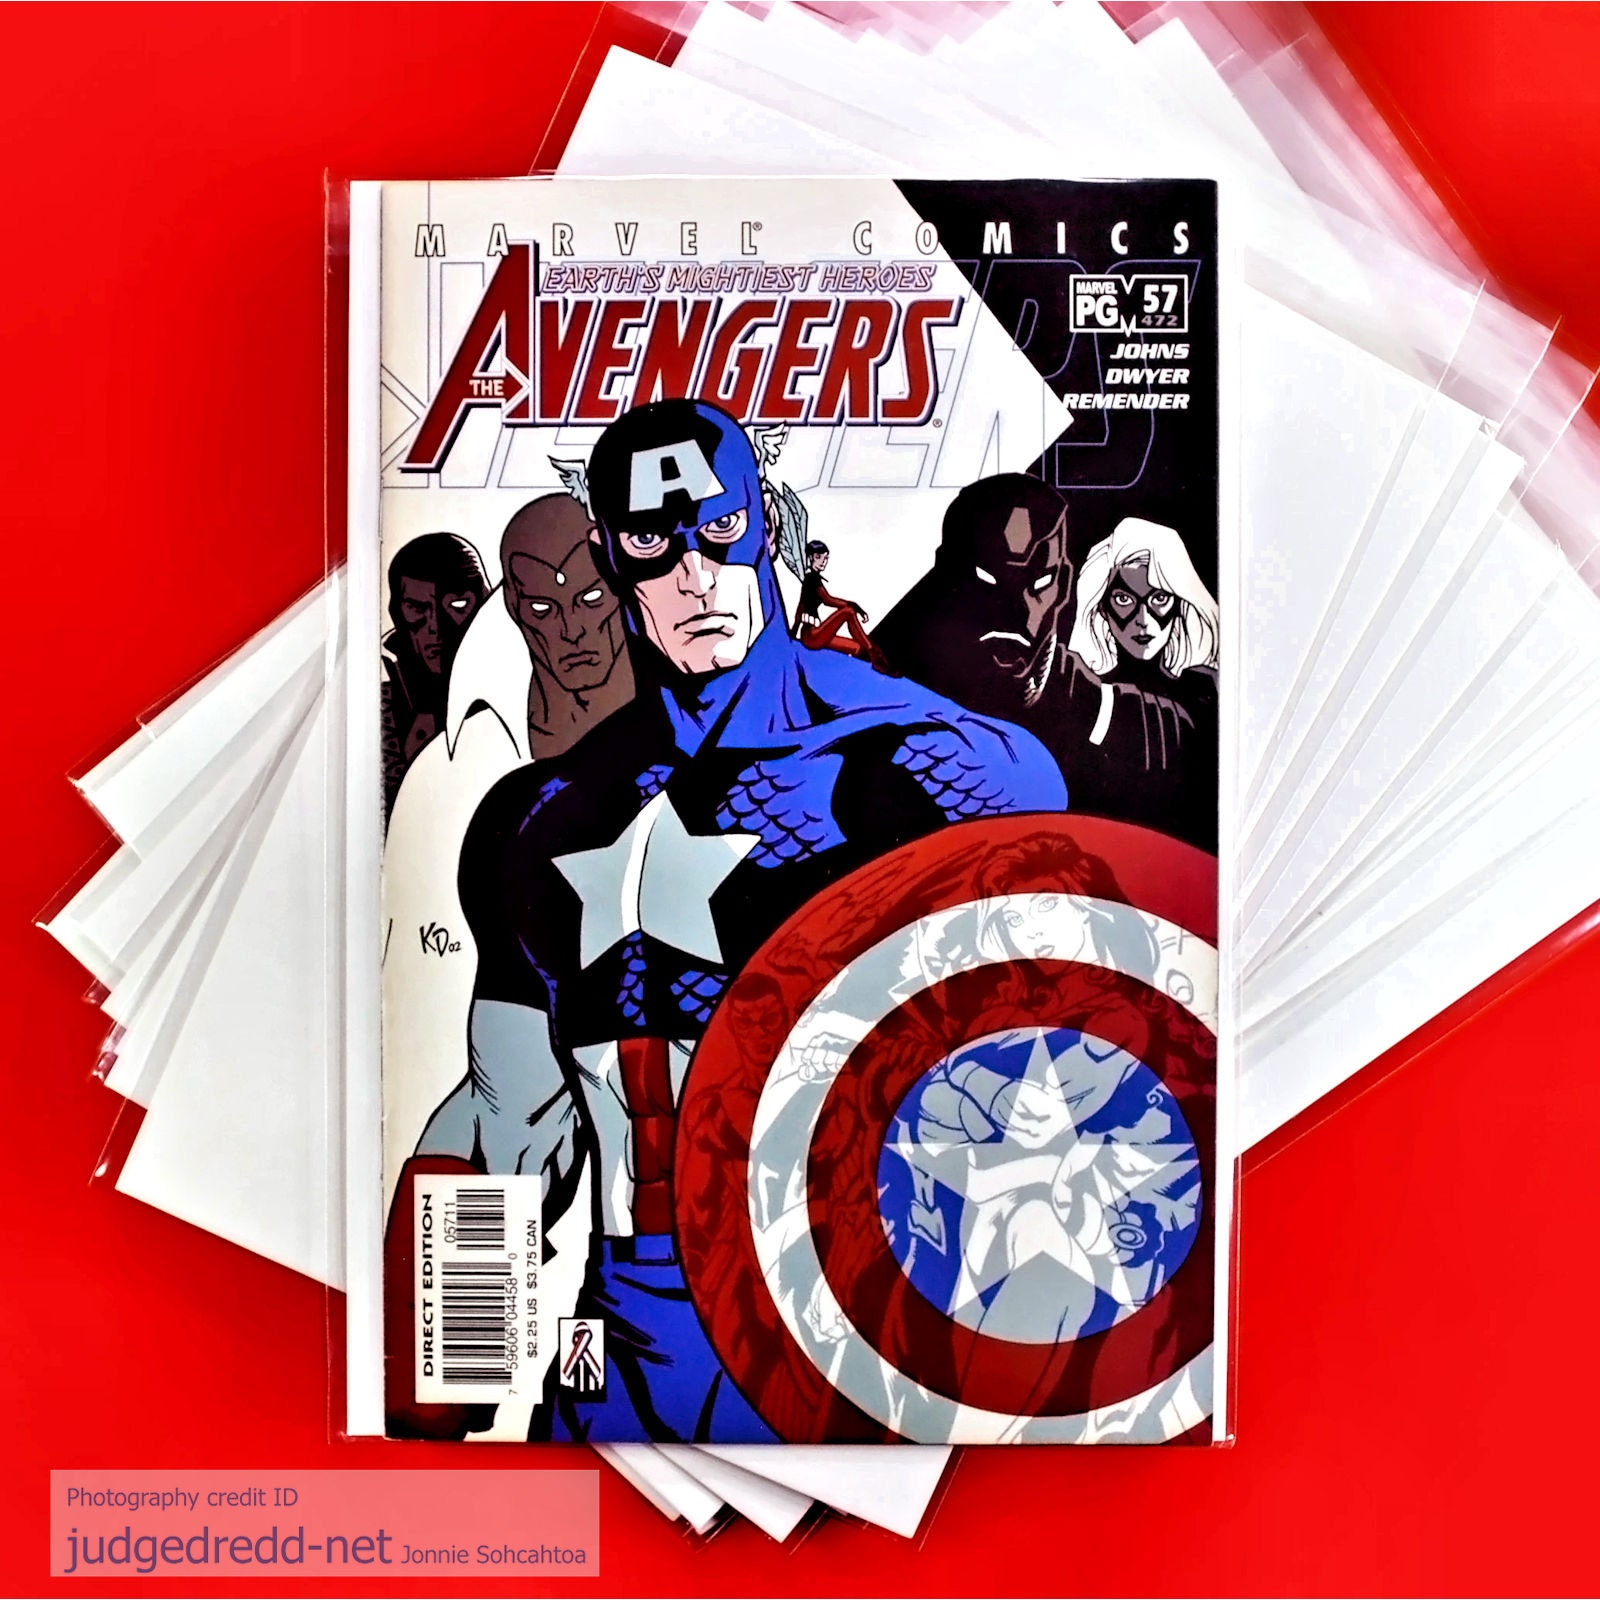 10 PREMADE Current / Modern Comic Book Bags and Boards / Sleeves Acid Free